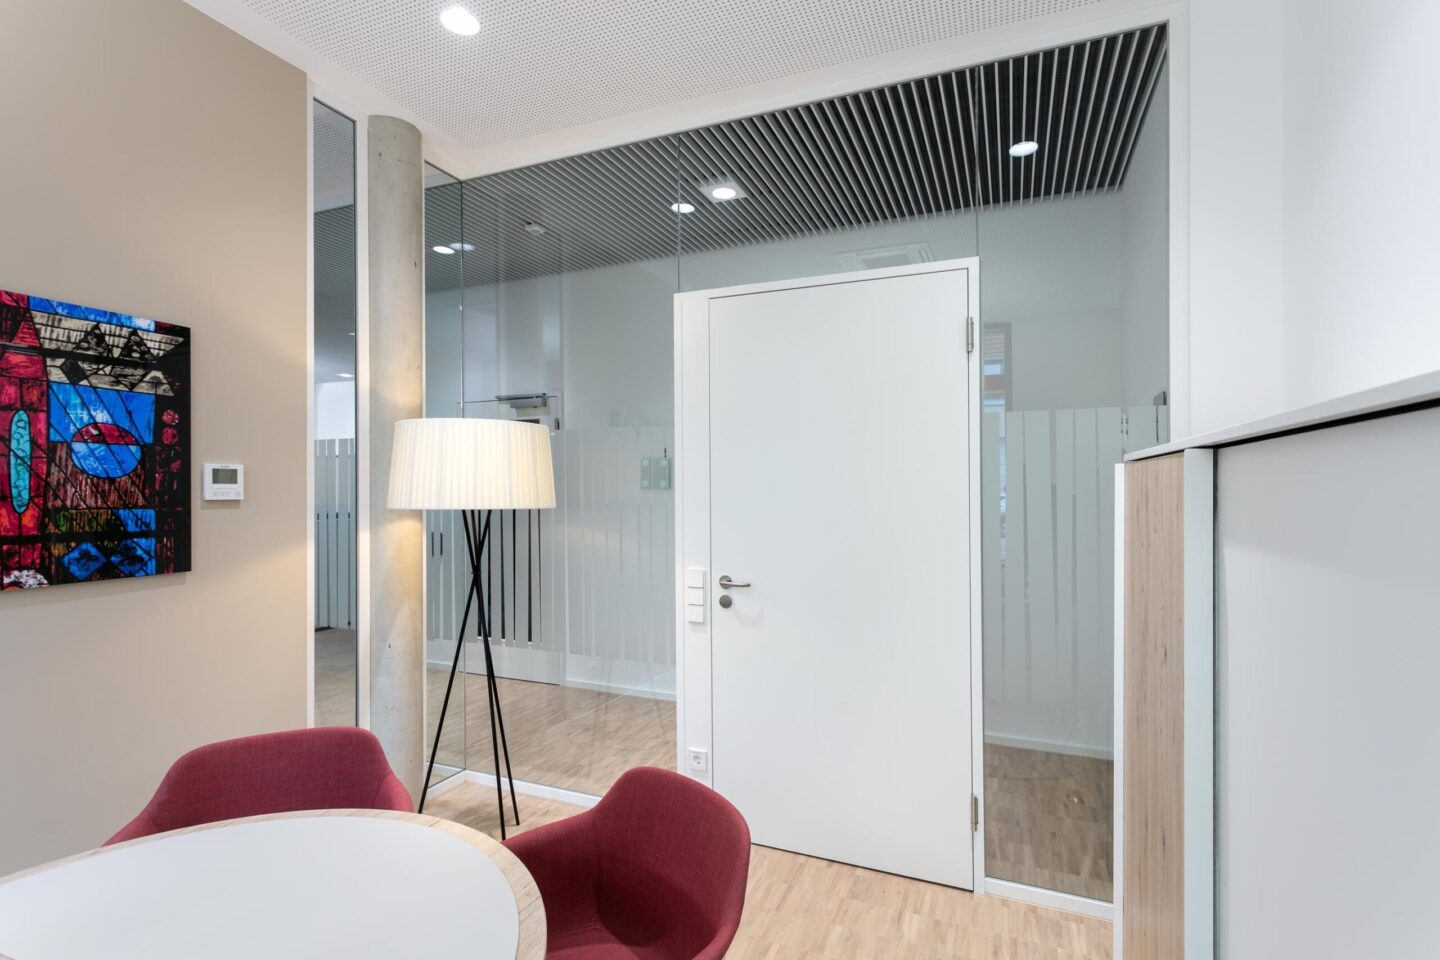 Sparkasse-Blankenloch │ office space │ consultant room │ glass walls